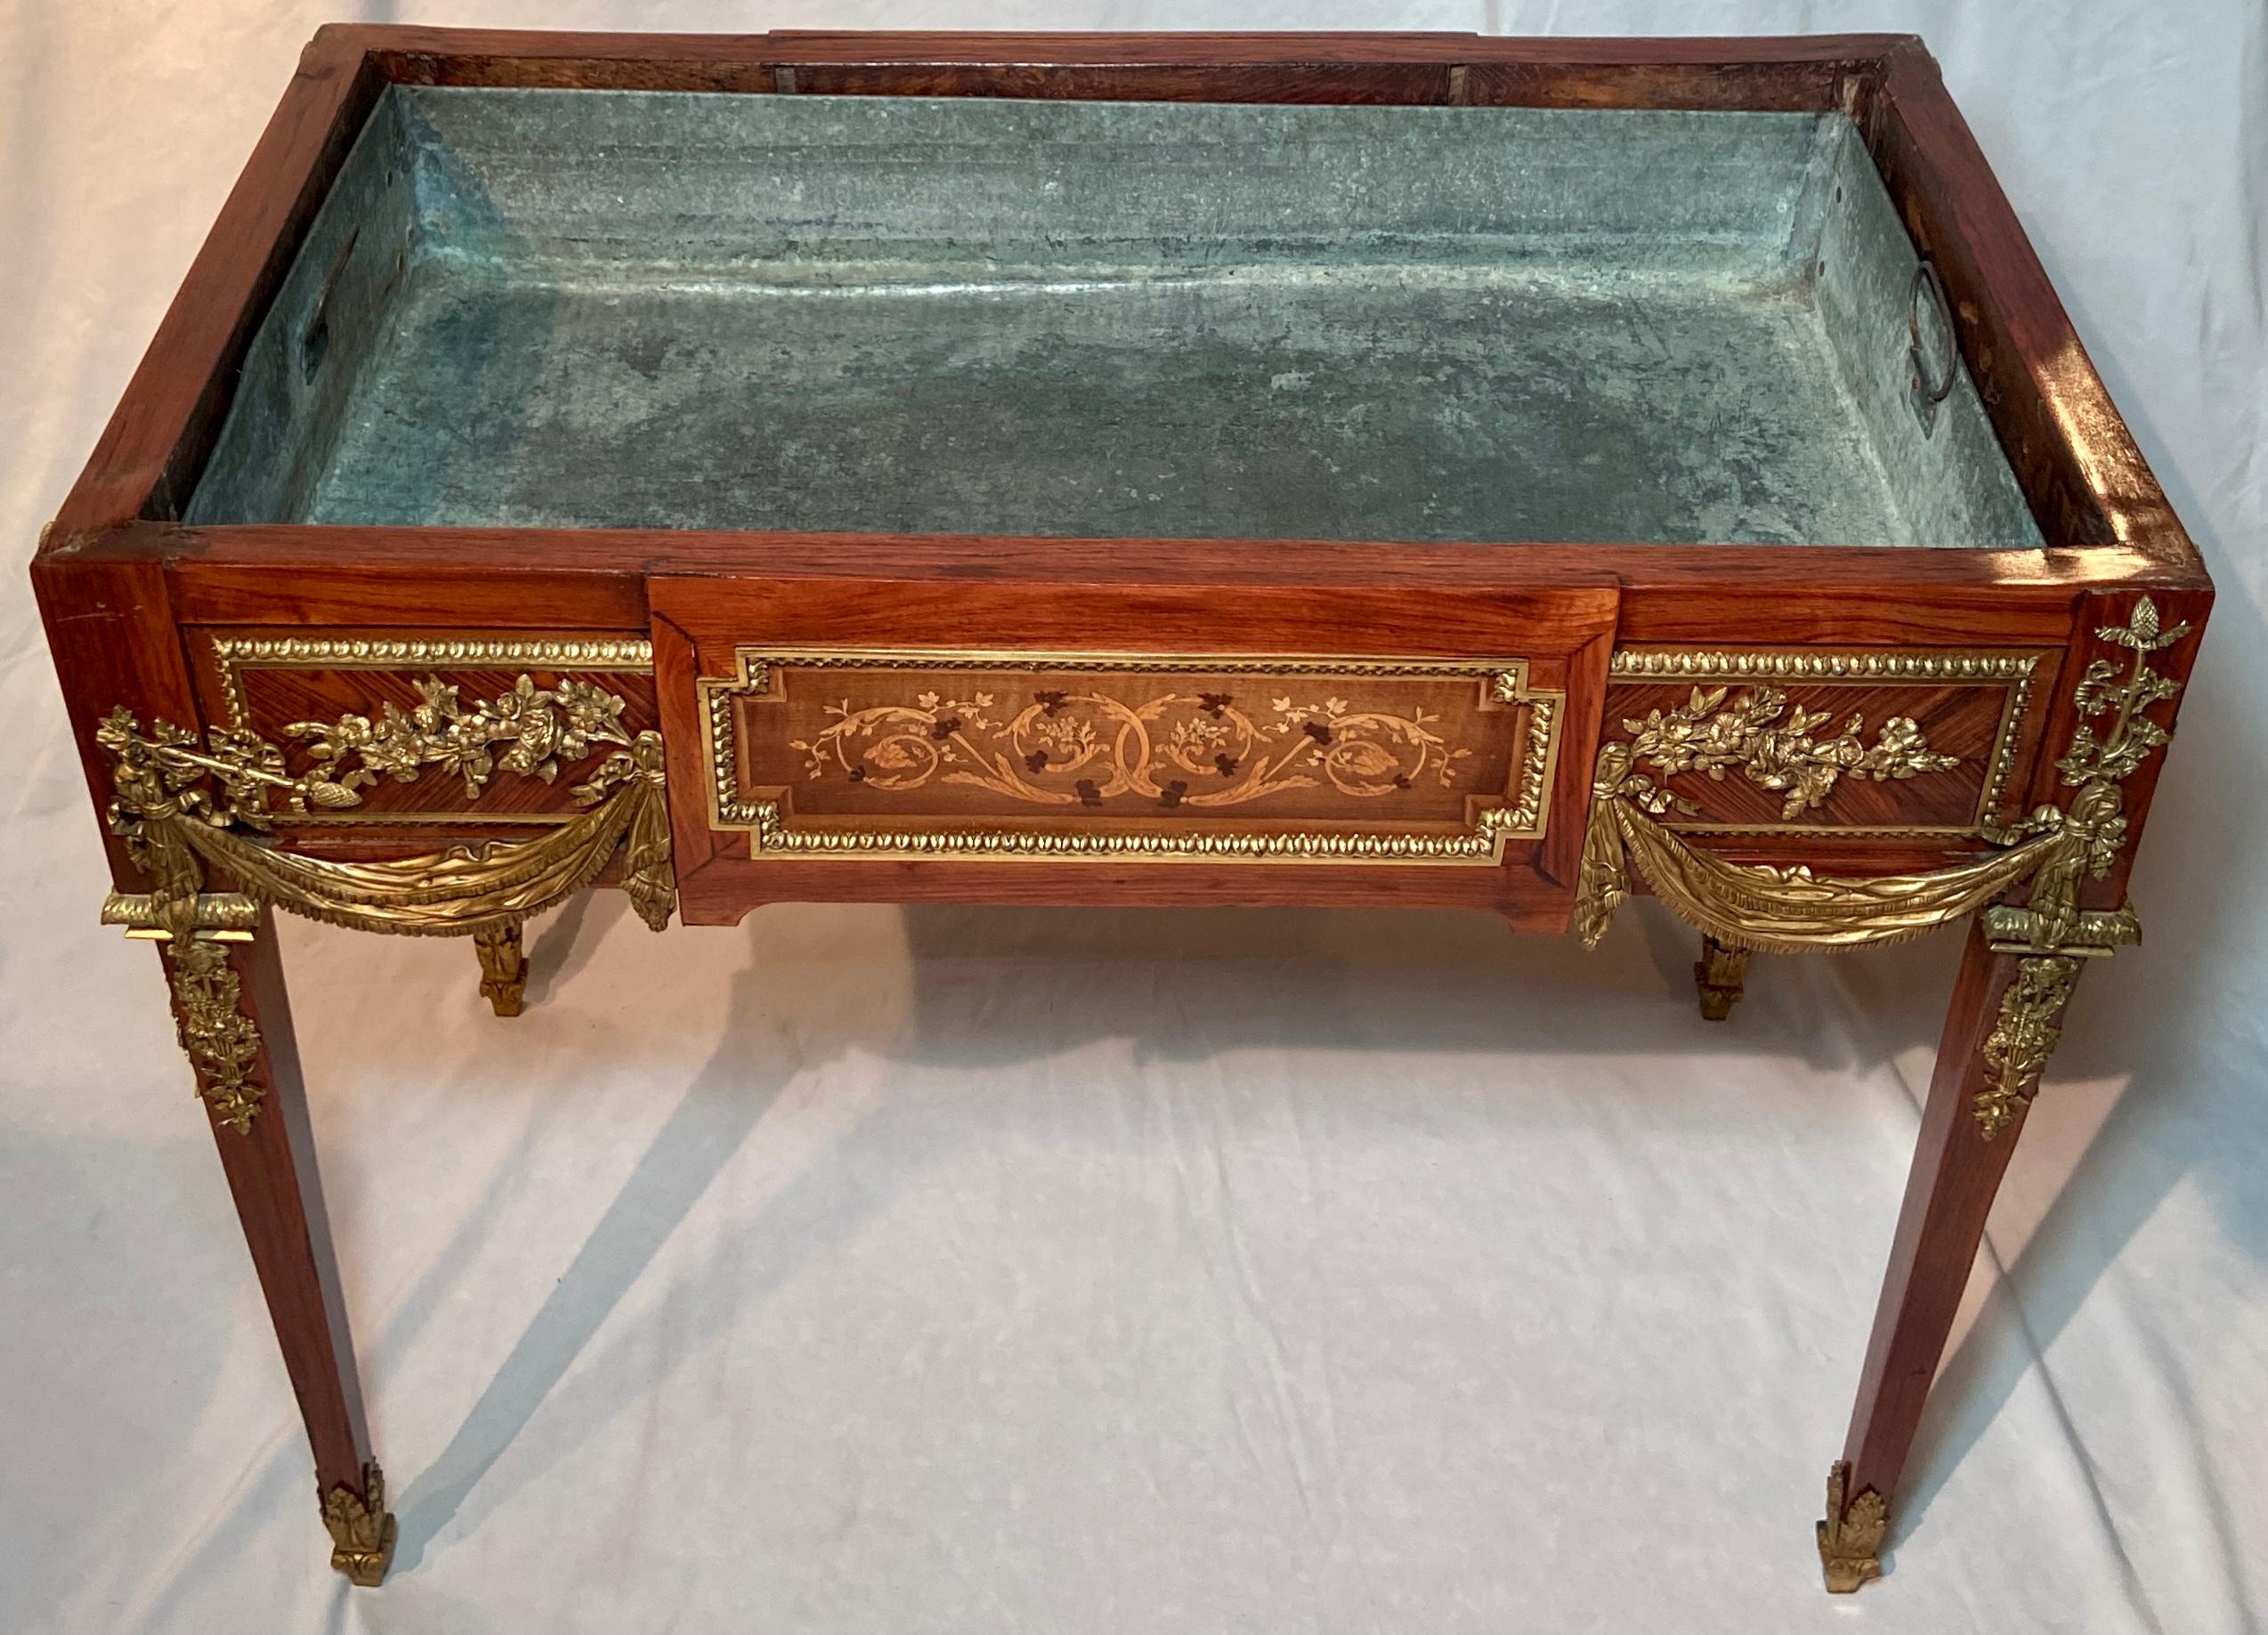 Antique French Napoleon III Ormolu Mounted Table Desk and Jardiniere, Circa 1870 For Sale 1